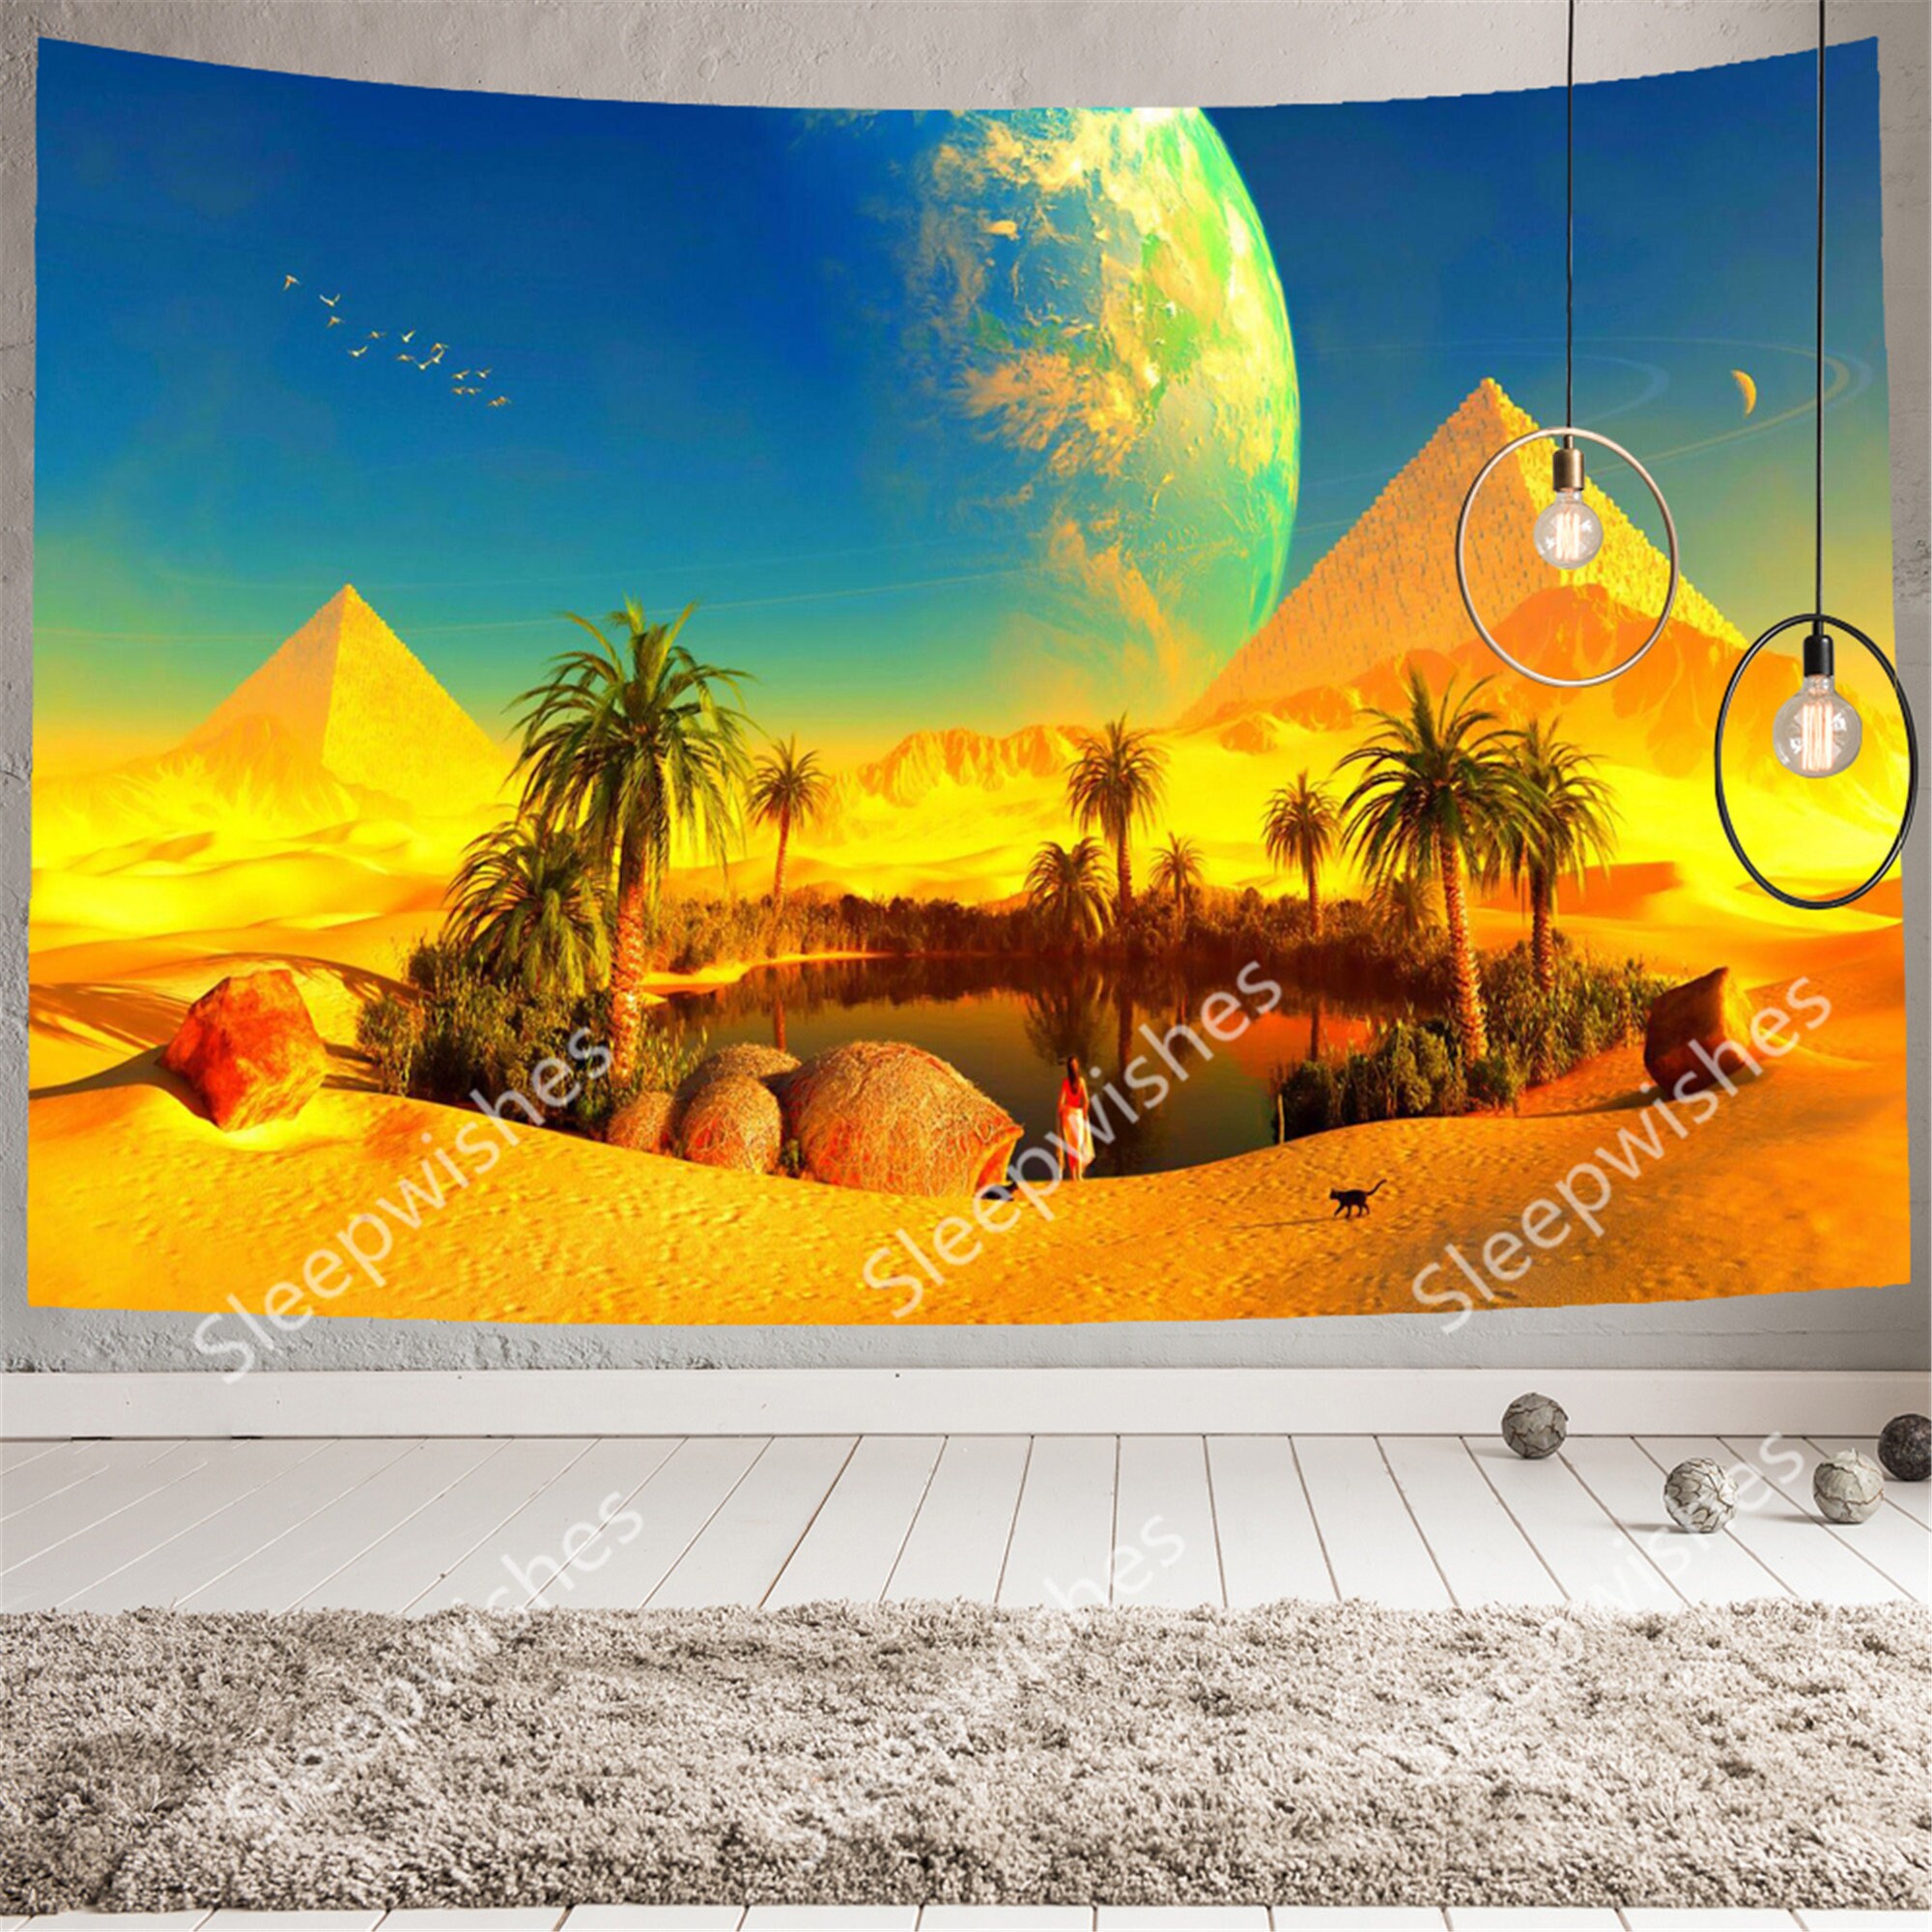 Pyramid Tapestry Wall Hanging Desert Oasis Tapestry Moon | Etsy